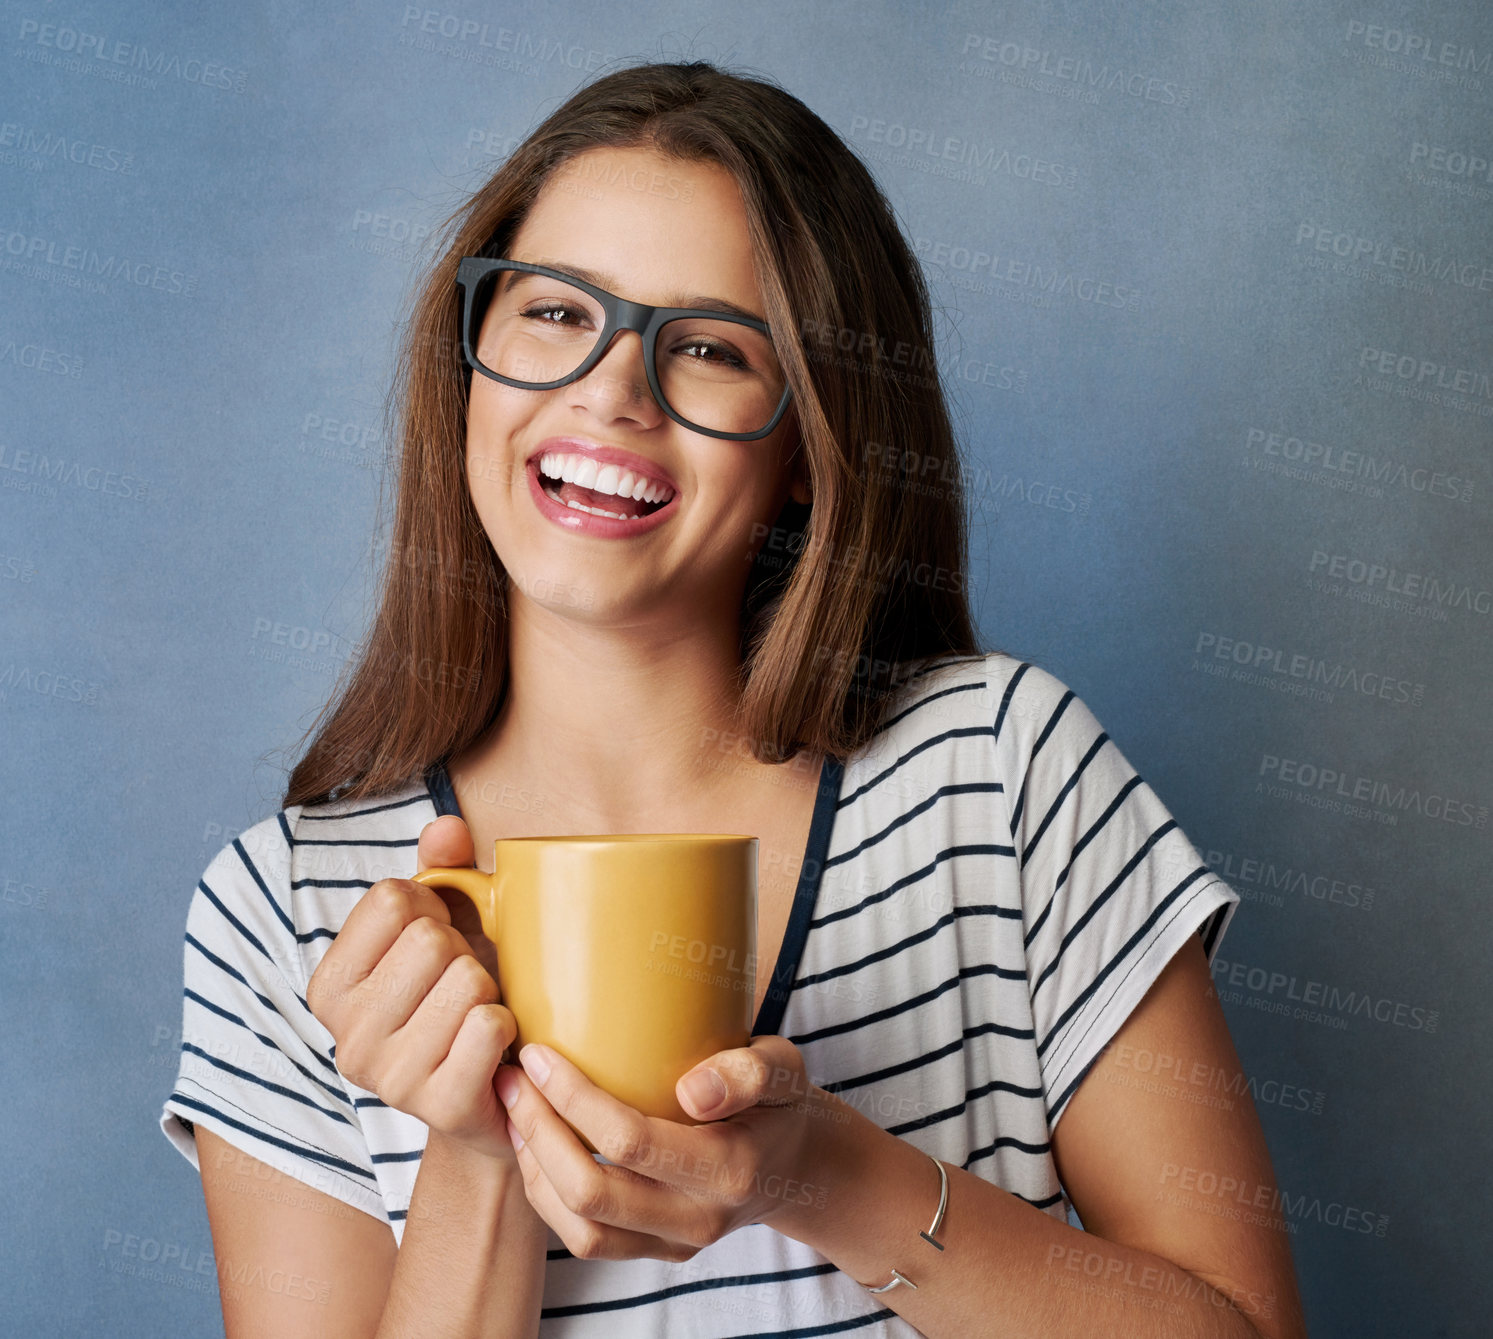 Buy stock photo Studio shot of an attractive young woman holding a coffee mug against a gray background